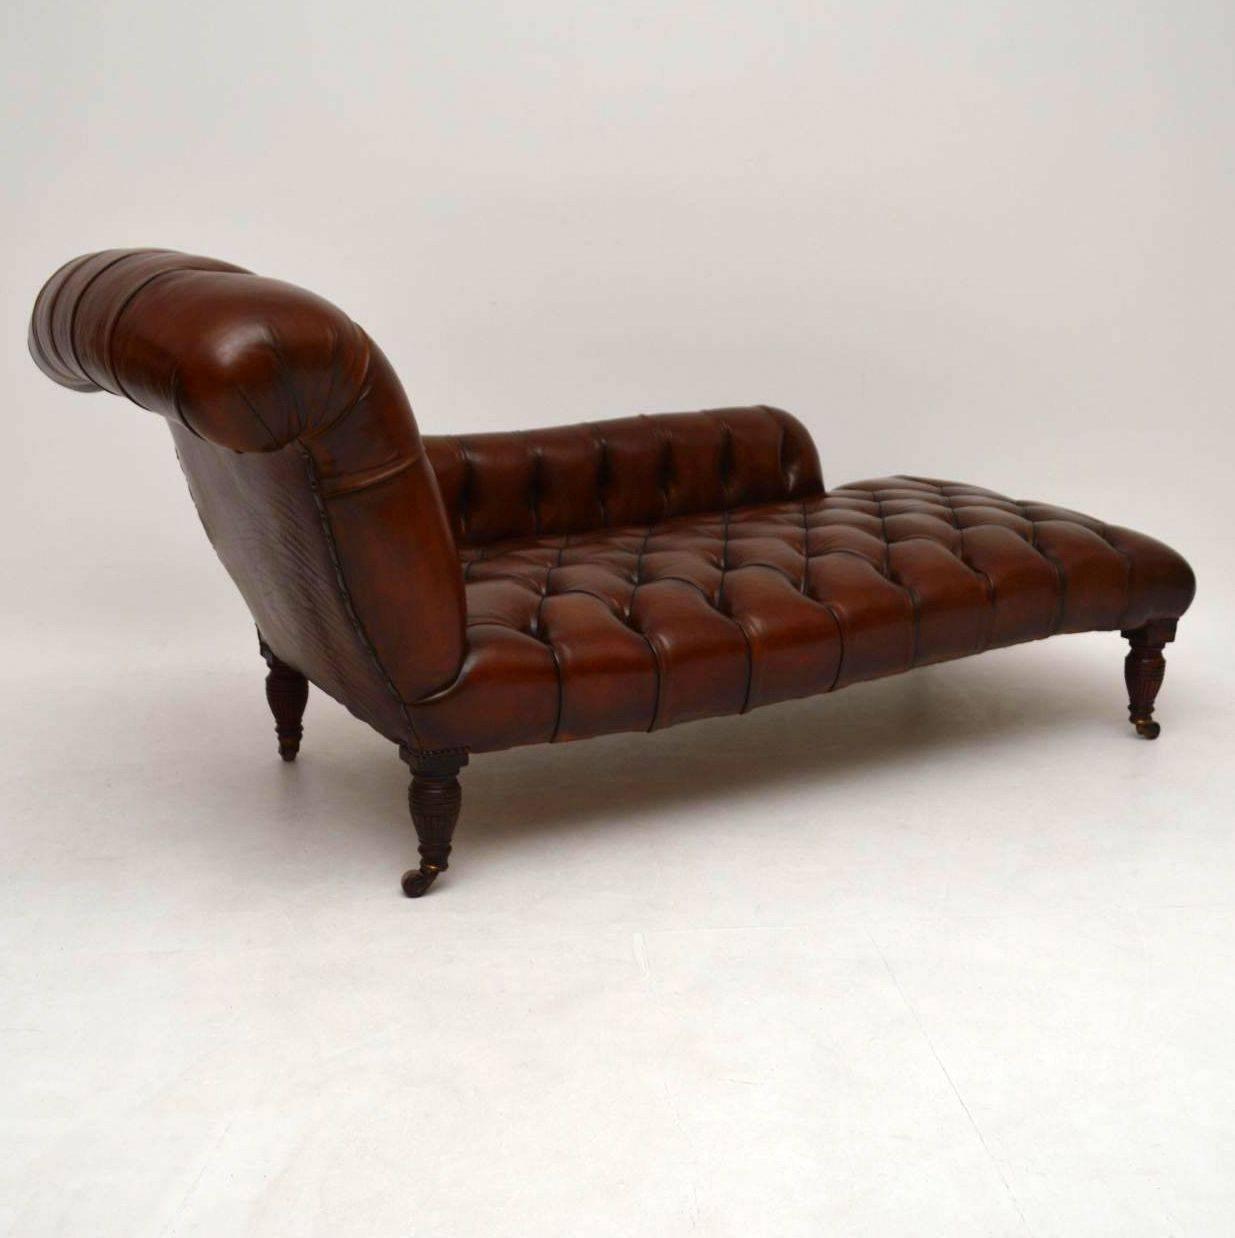 English Antique Victorian Deep Buttoned Leather Chaise Longue